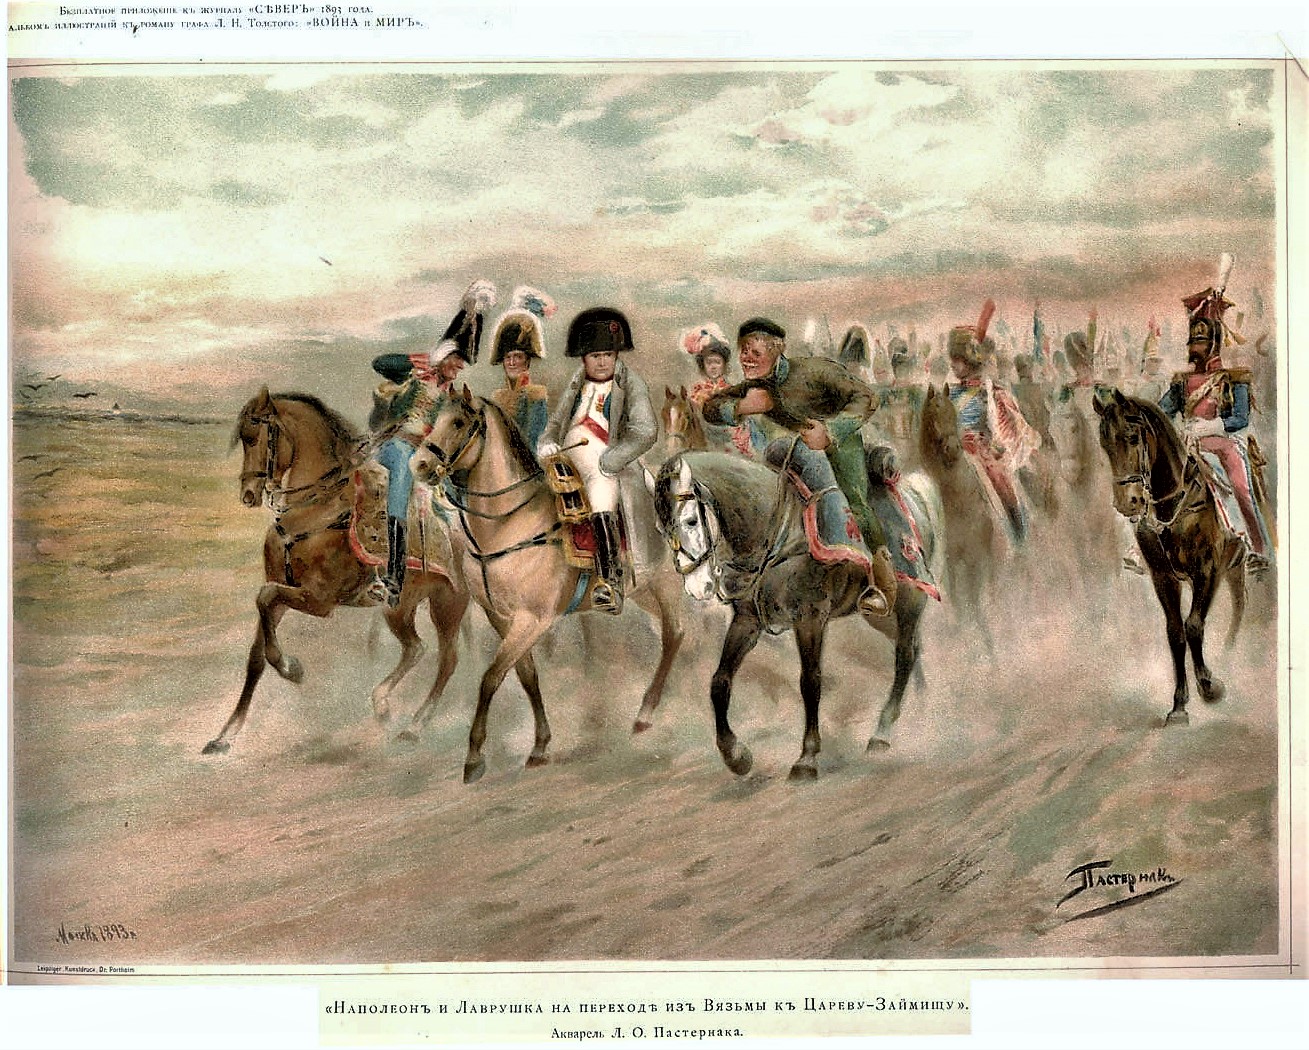 a group of men riding on the backs of horses.